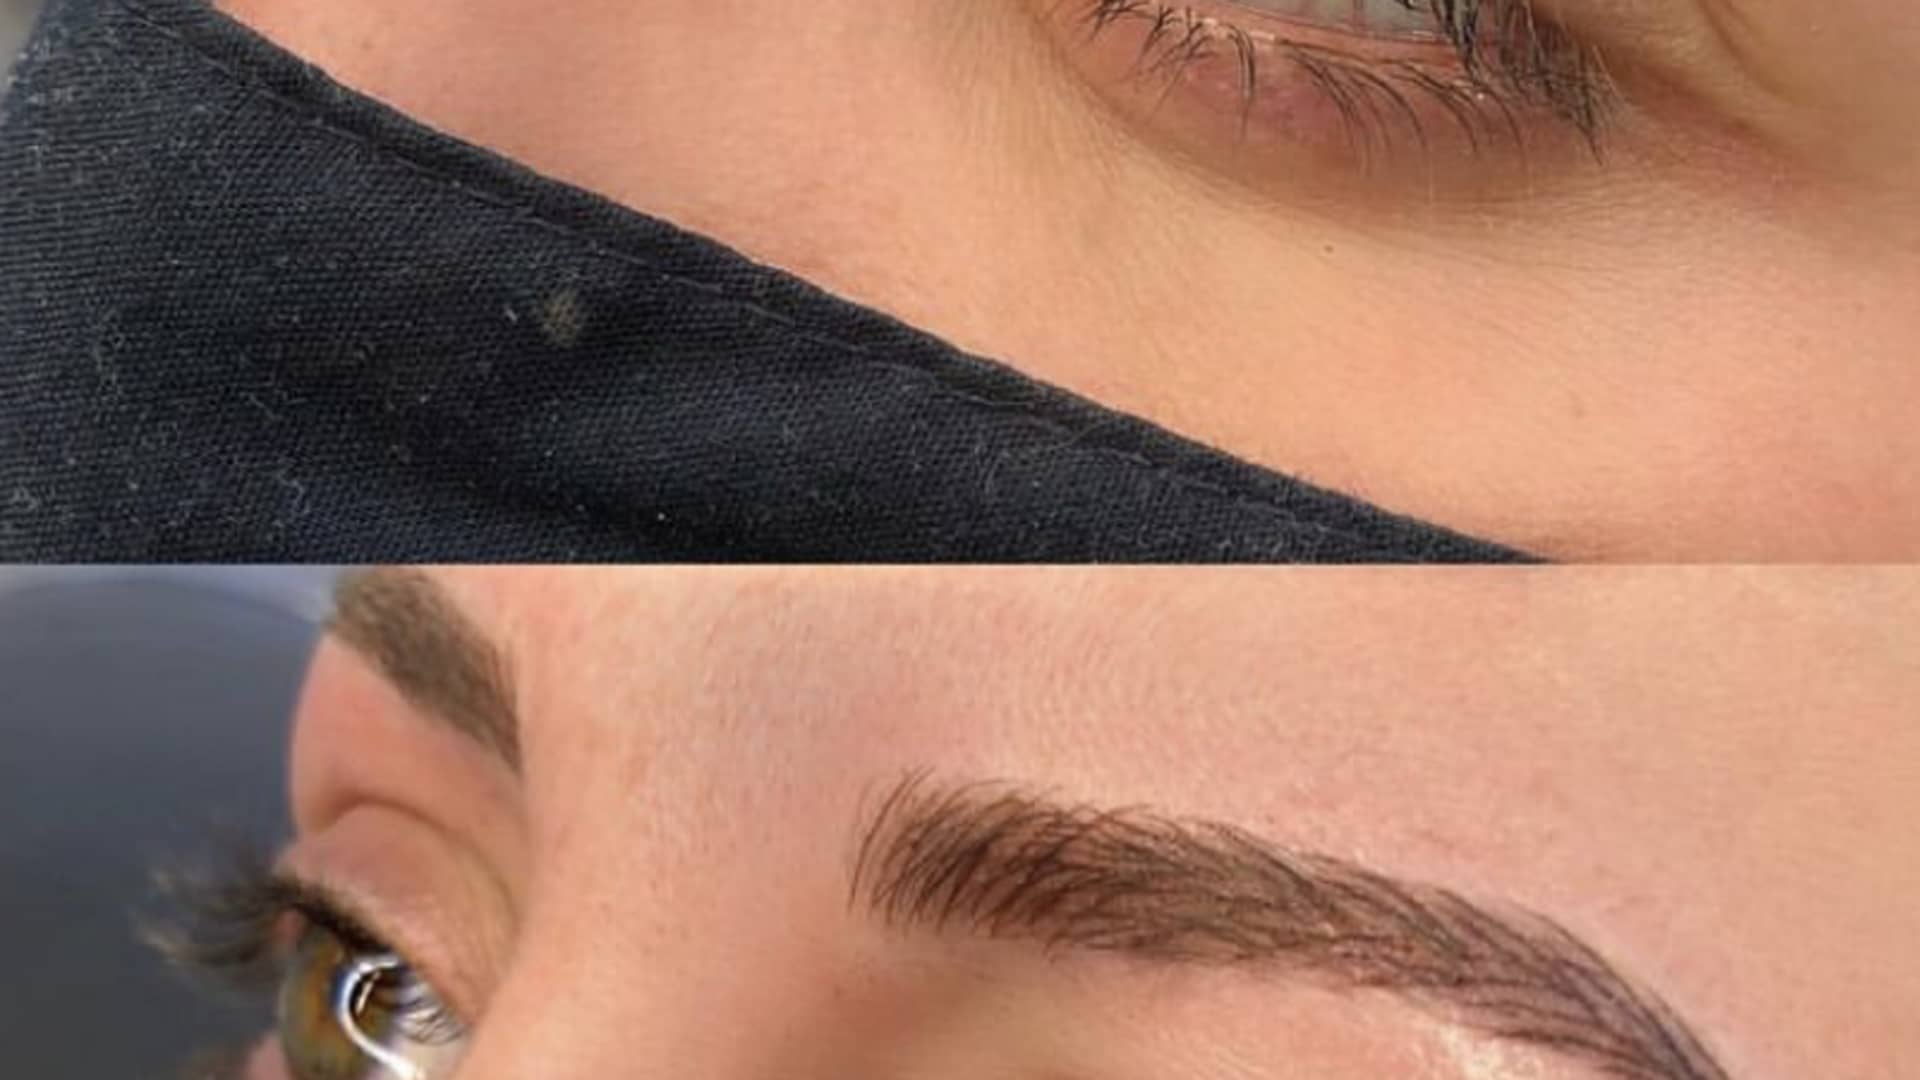 Microblading is a semi-permanent brow-enhancement procedure where small strokes — in the shape of individual hairs — are tattooed in the eyebrow areas.